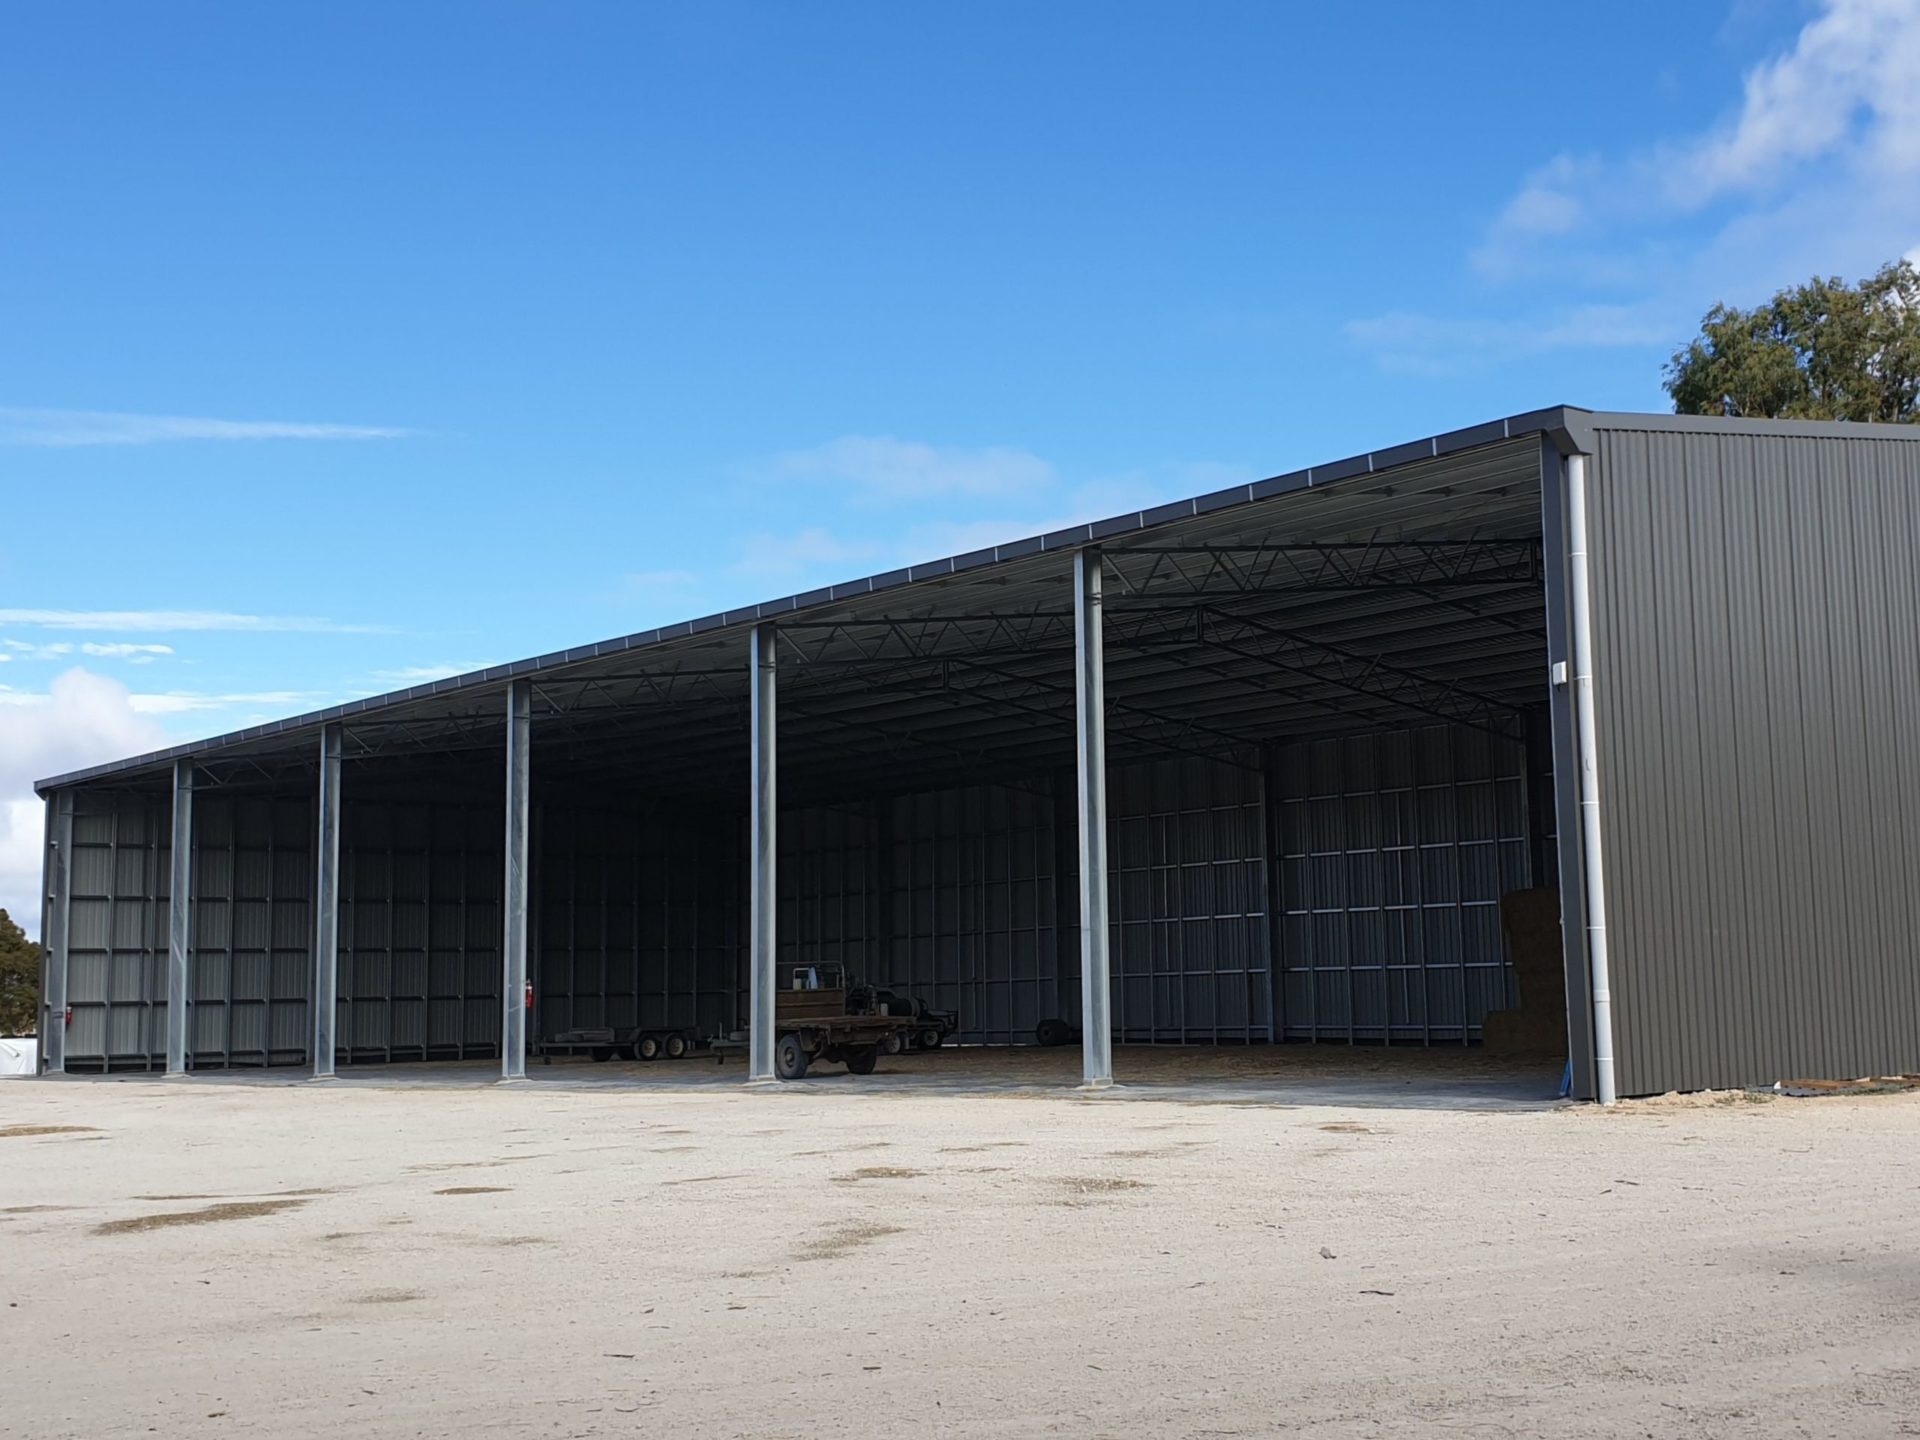 You are currently viewing 48m x 21m x 7.5m open-front hay shed